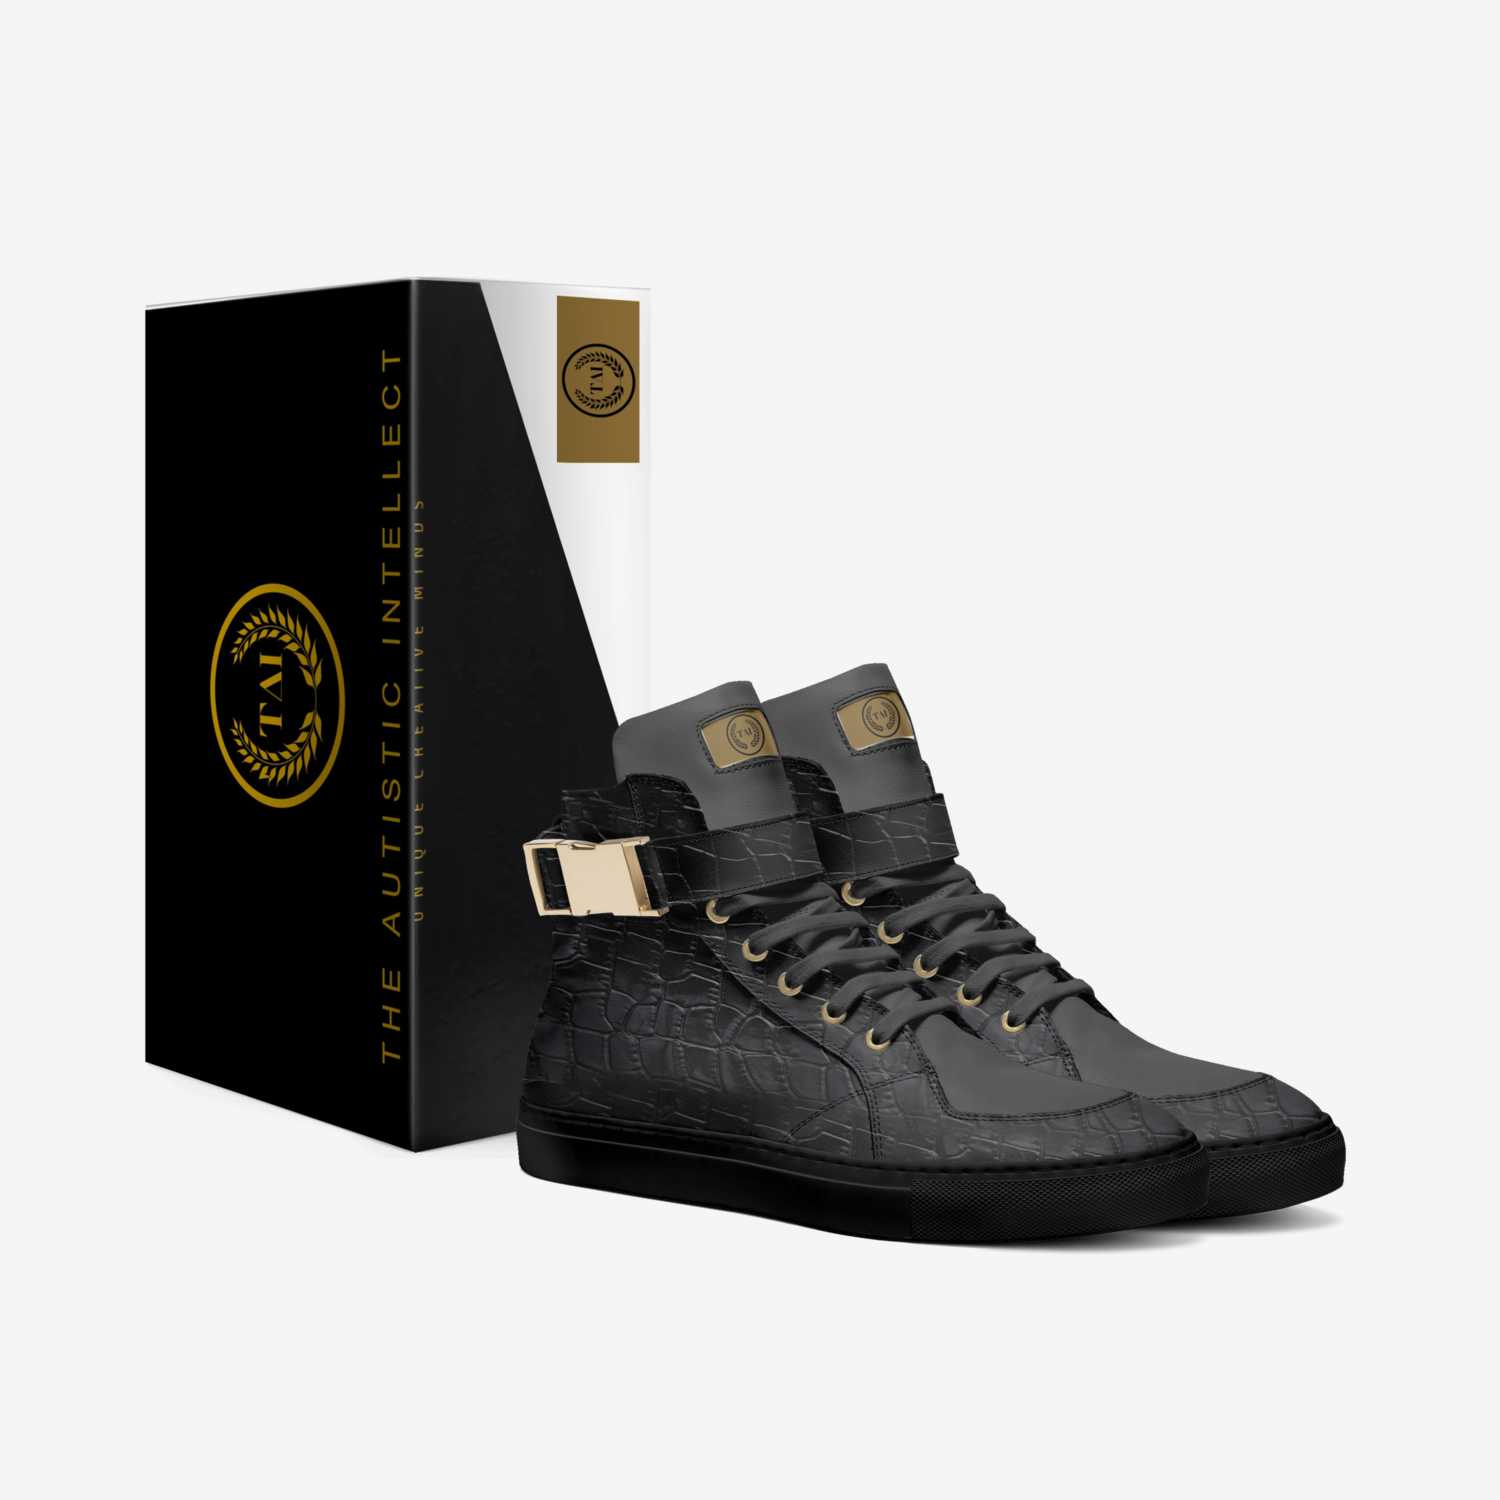 BLACK TAI custom made in Italy shoes by Alicia Grant | Box view